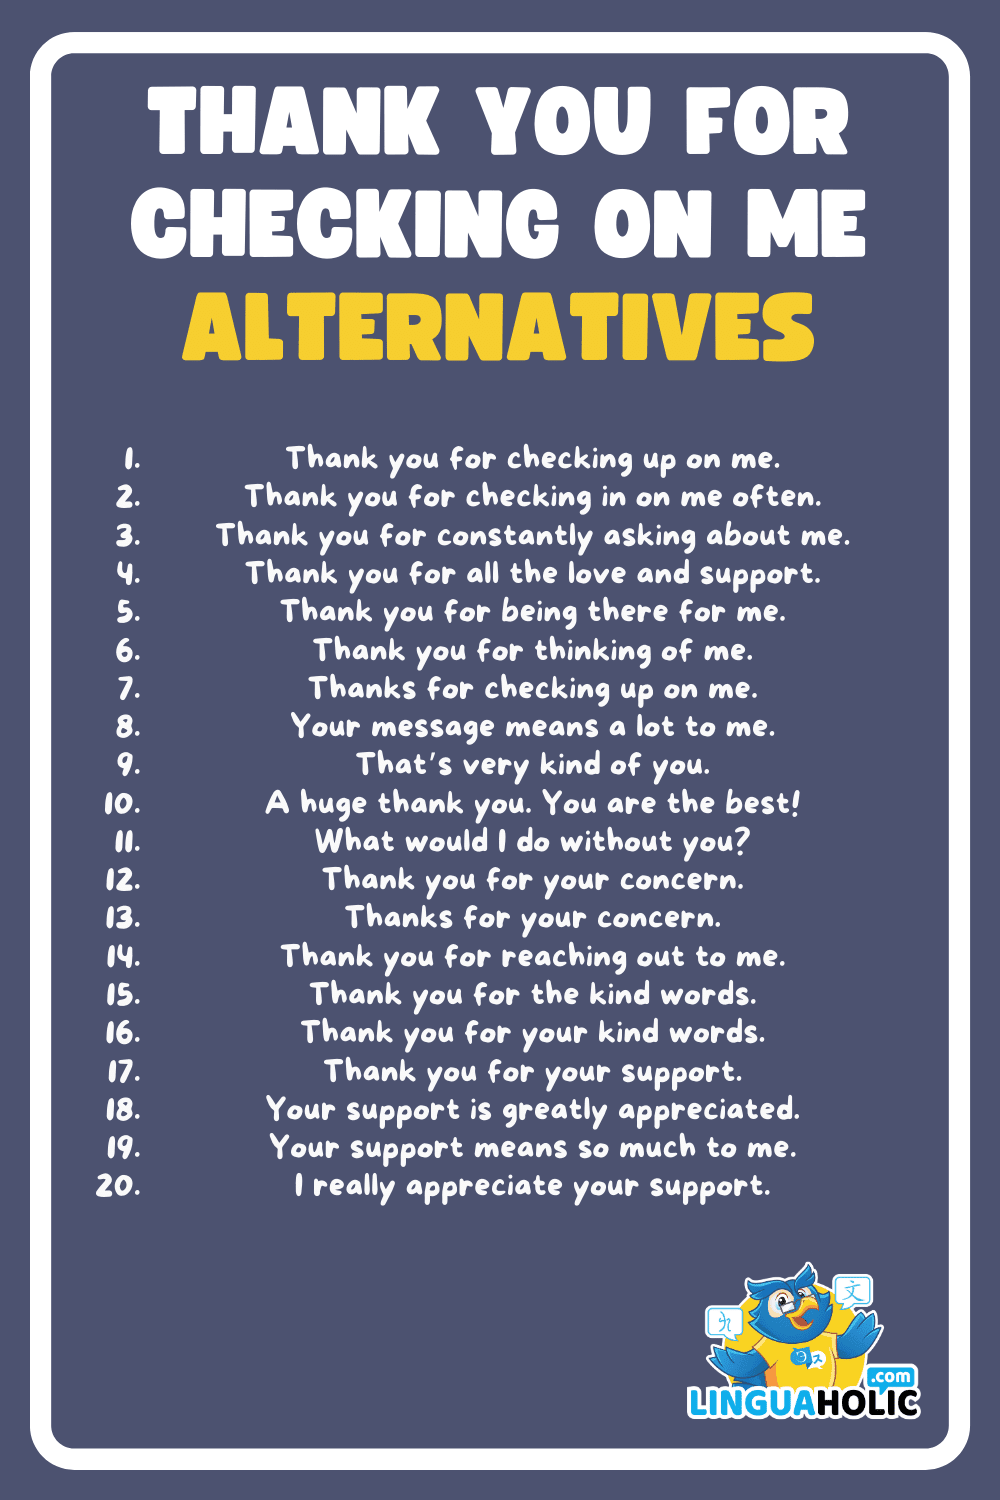 Thank you for checking on me Alternatives